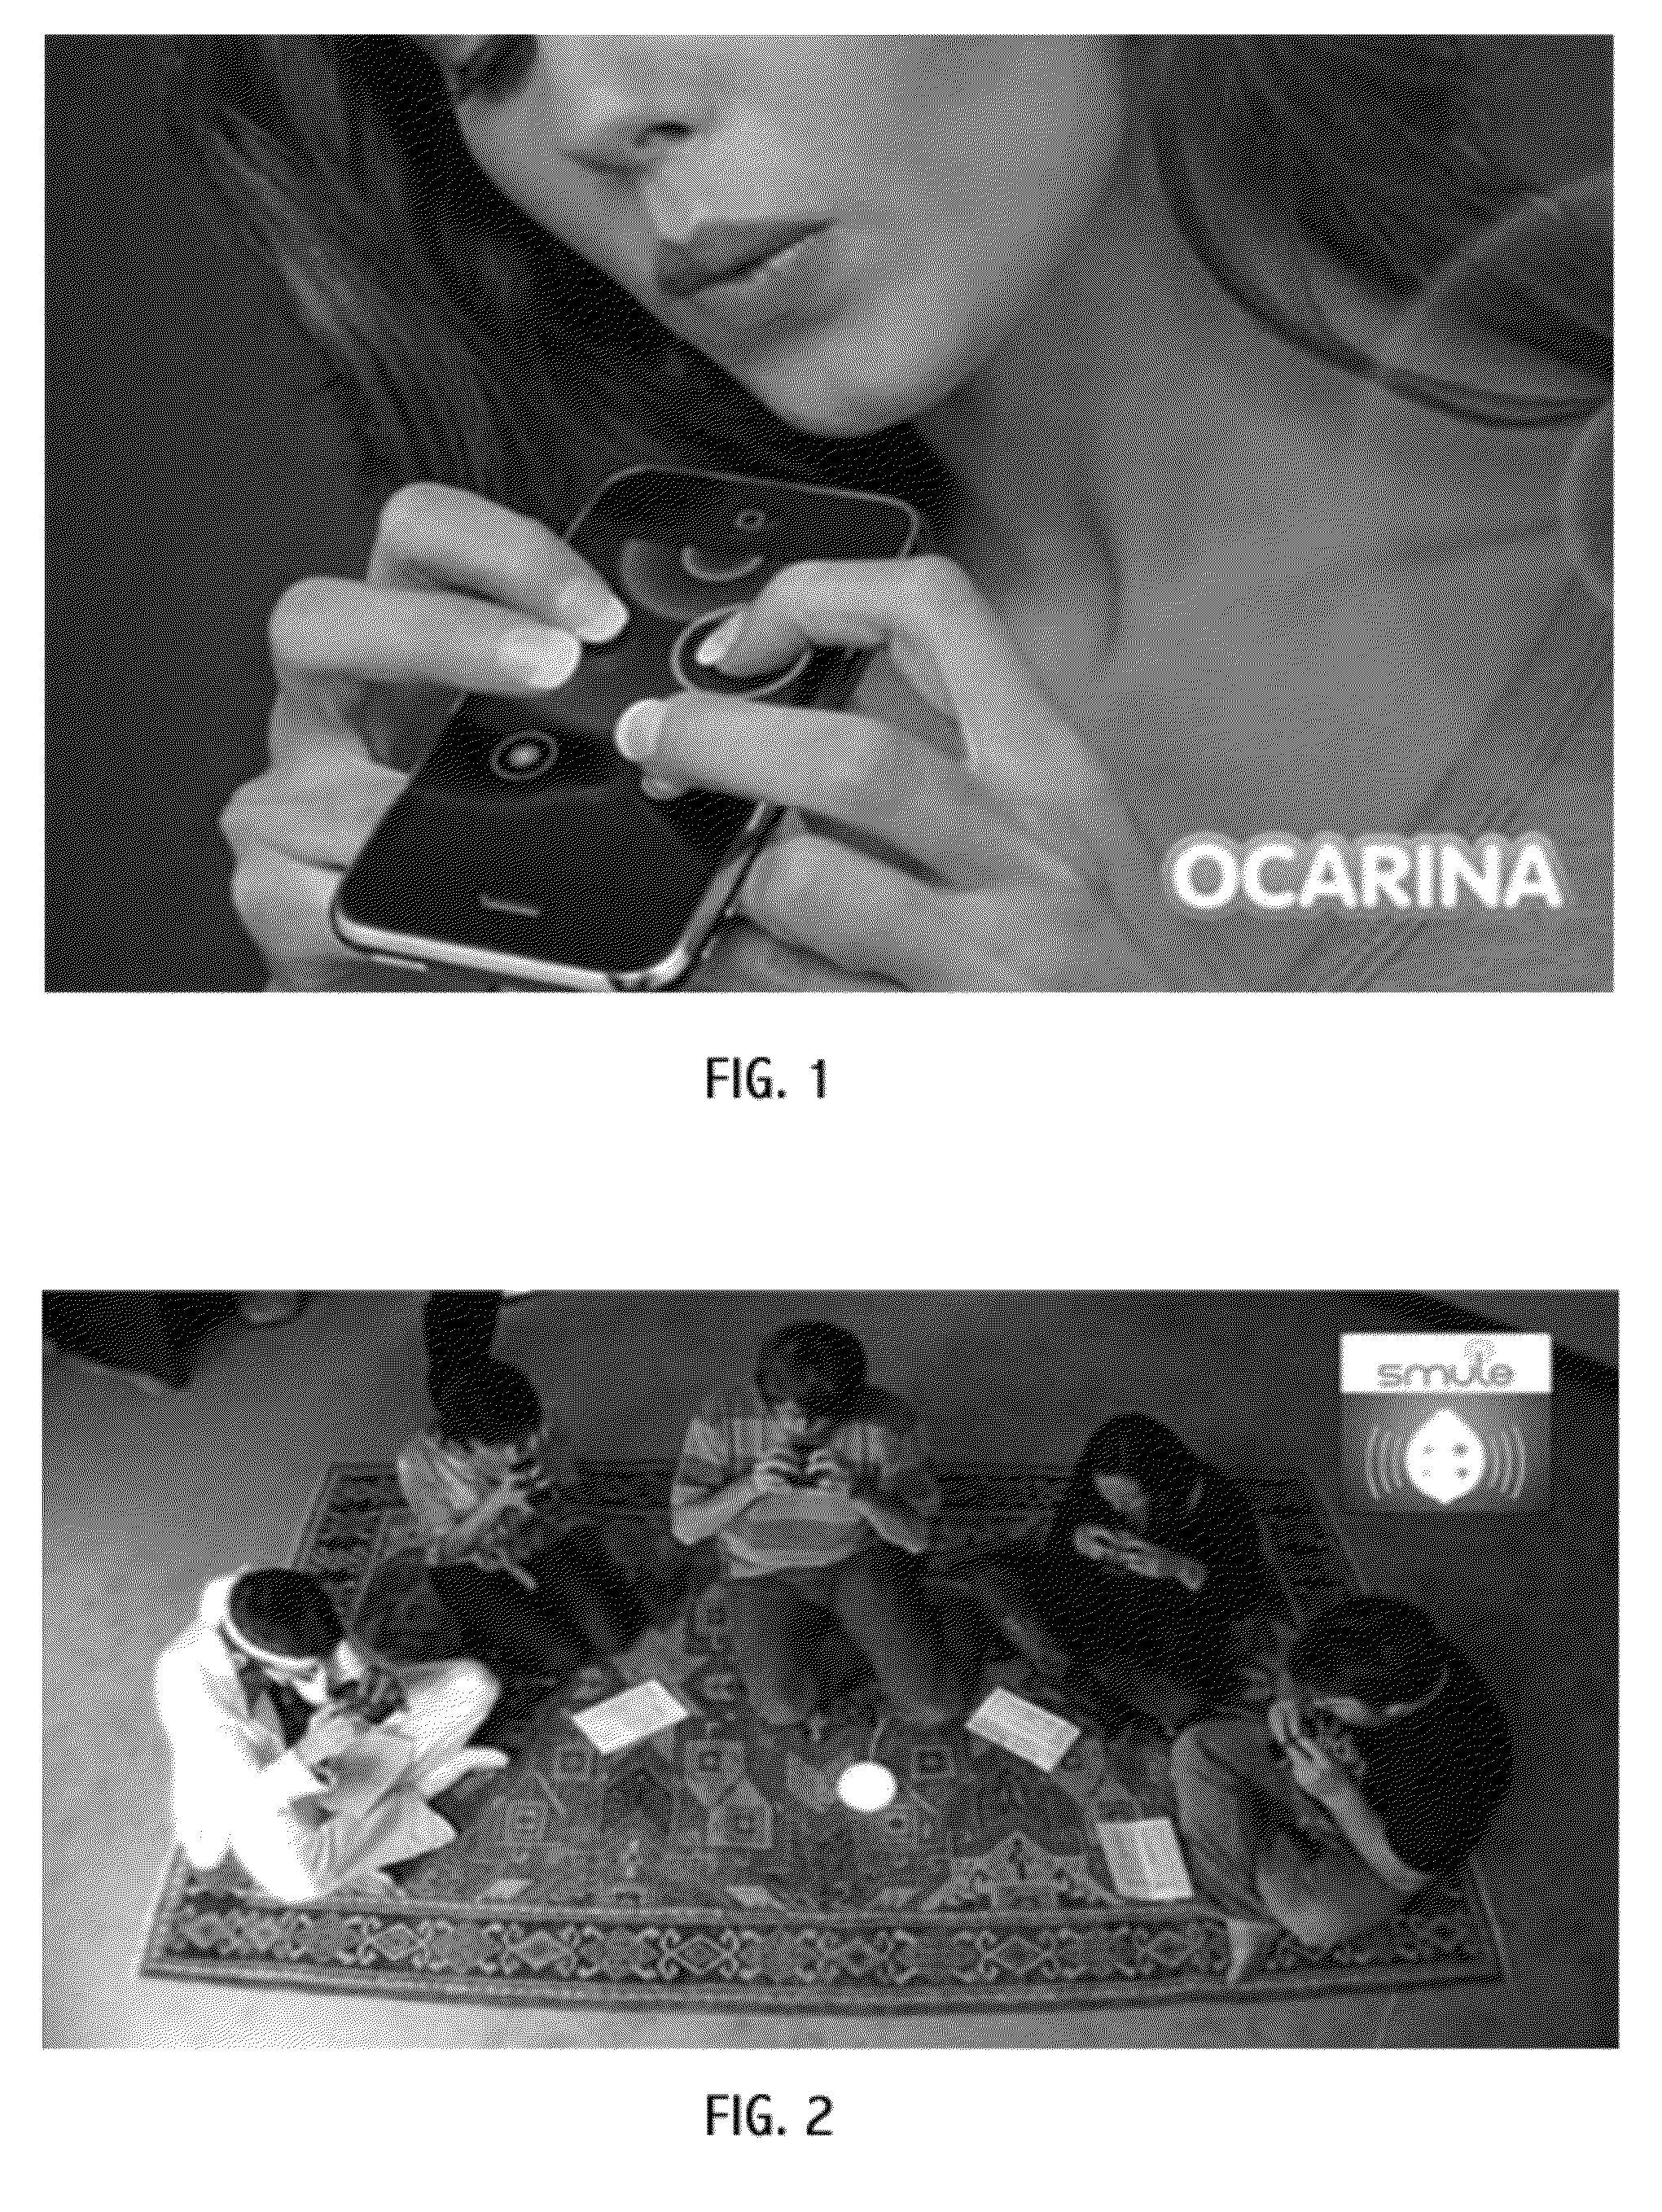 System and method for capture and rendering of performance on synthetic musical instrument